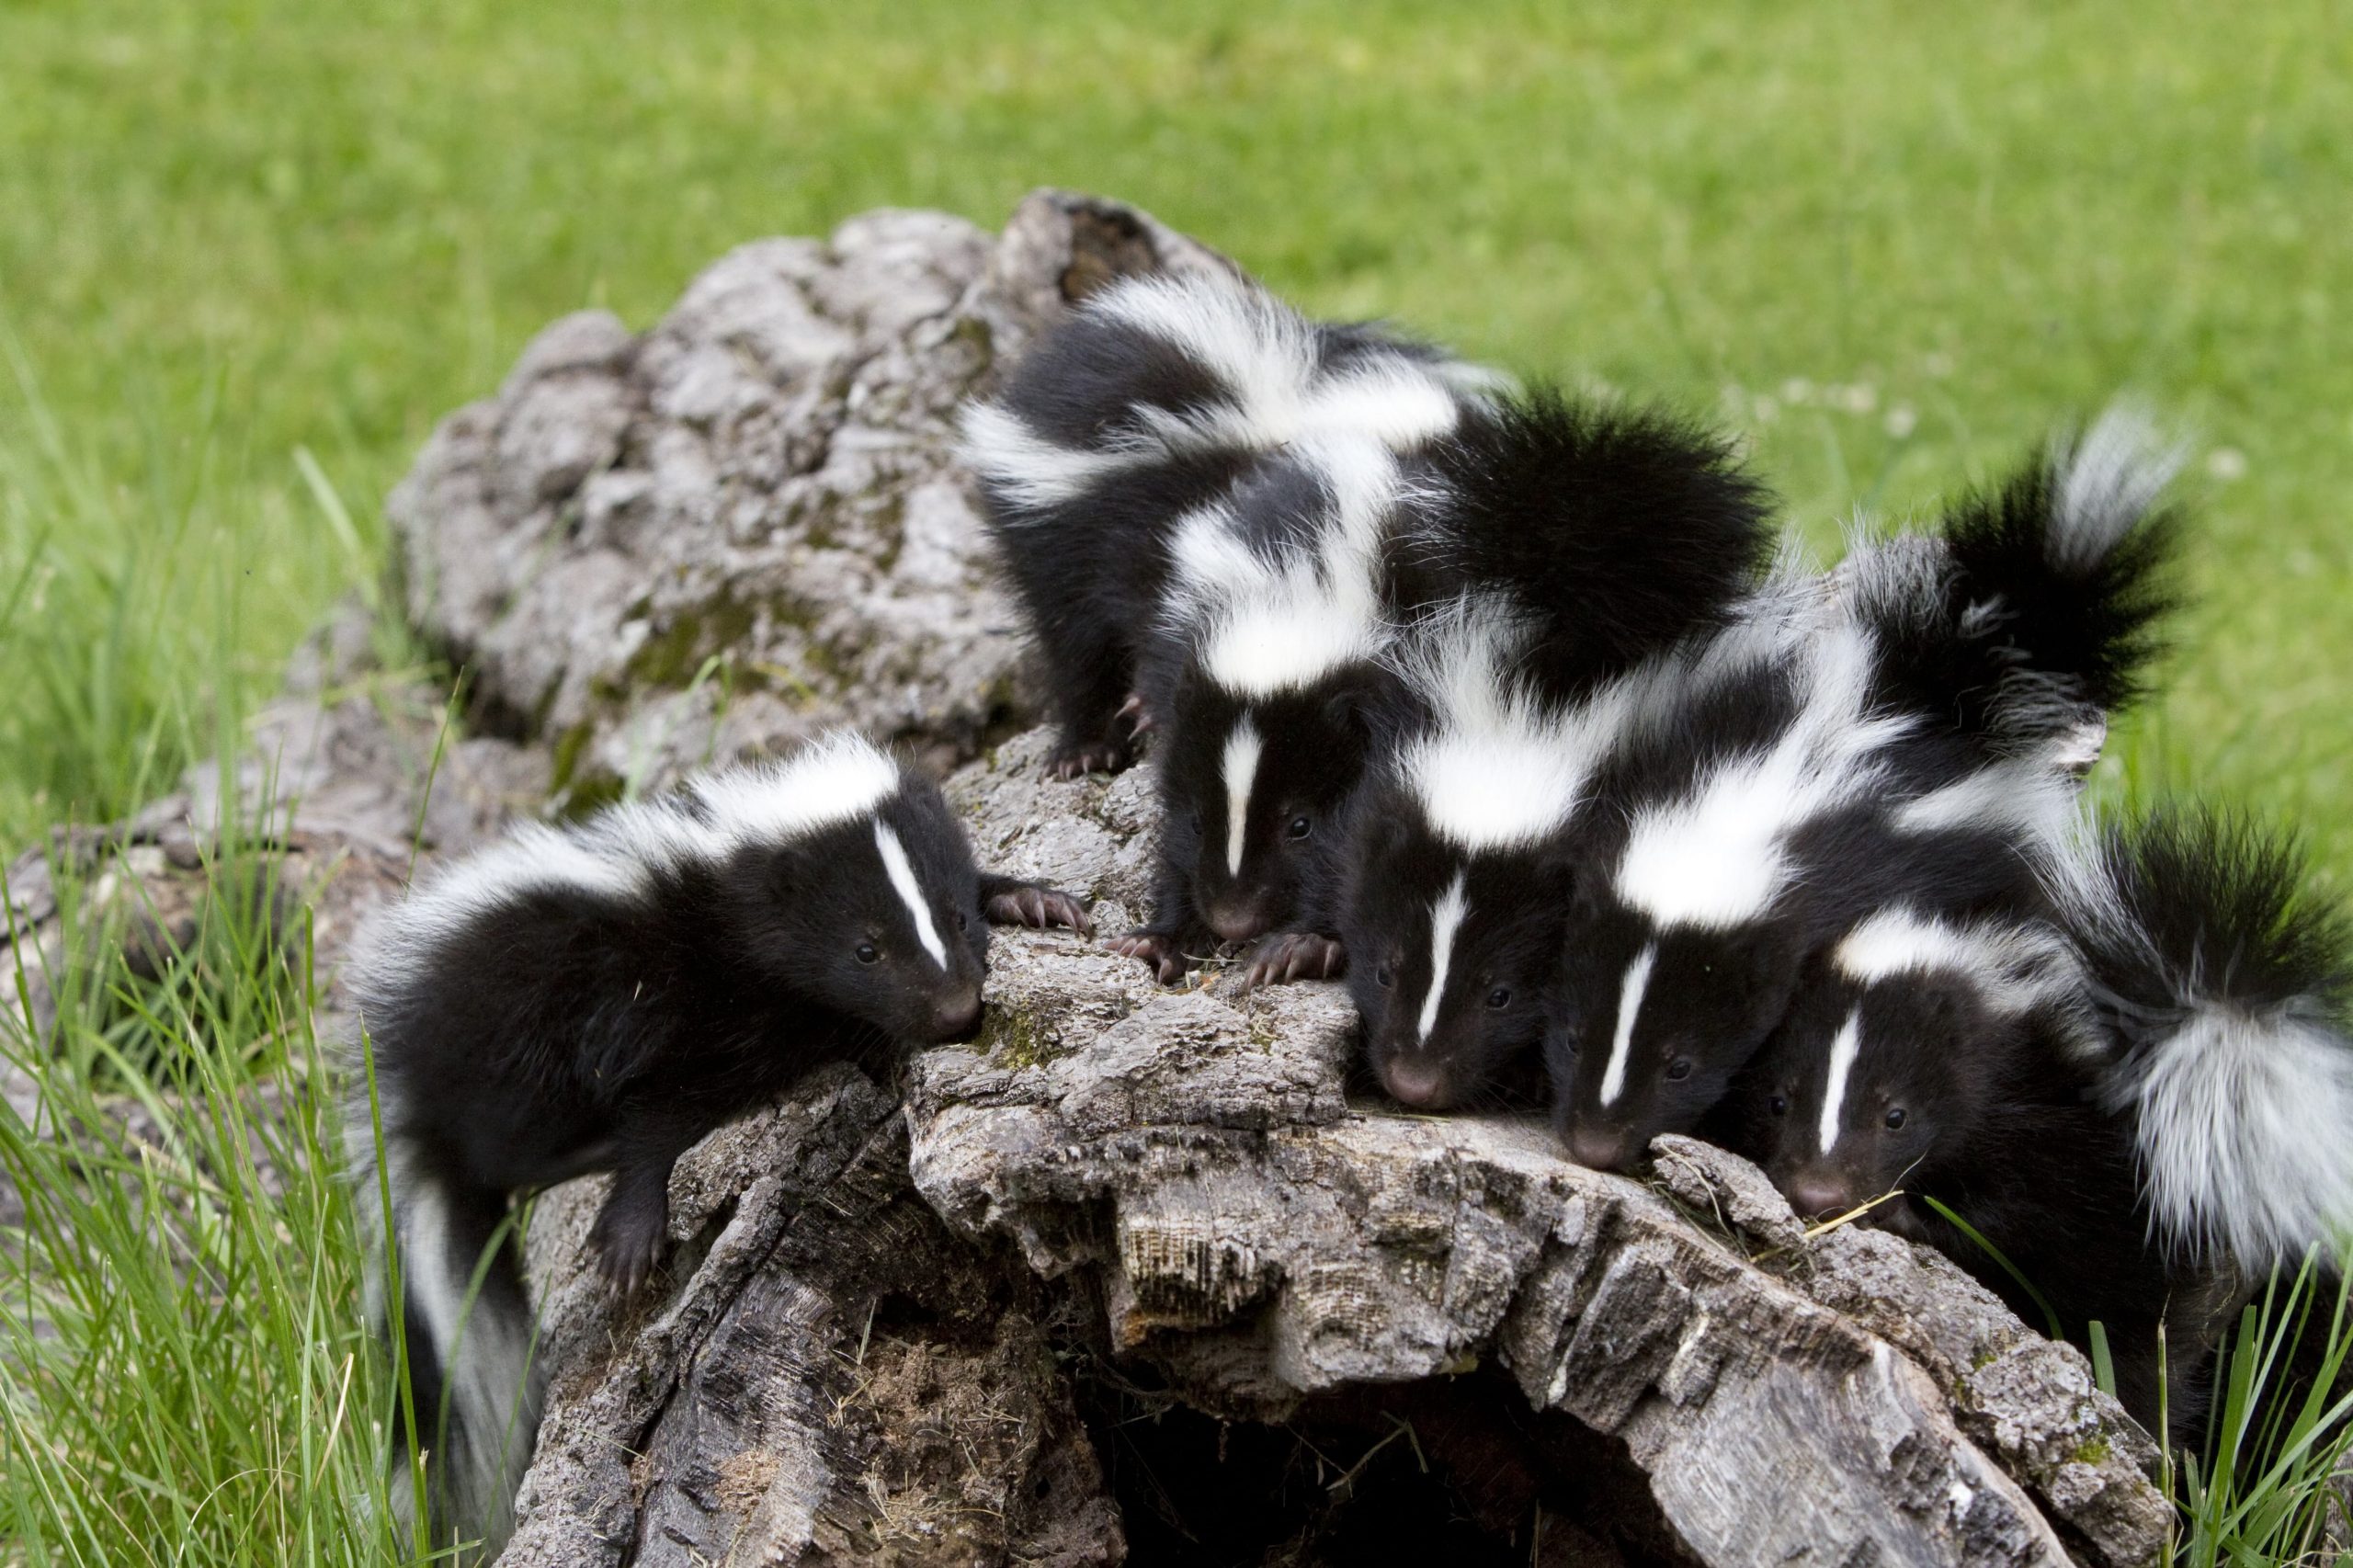 How To Get Rid Of A Trapped Skunk